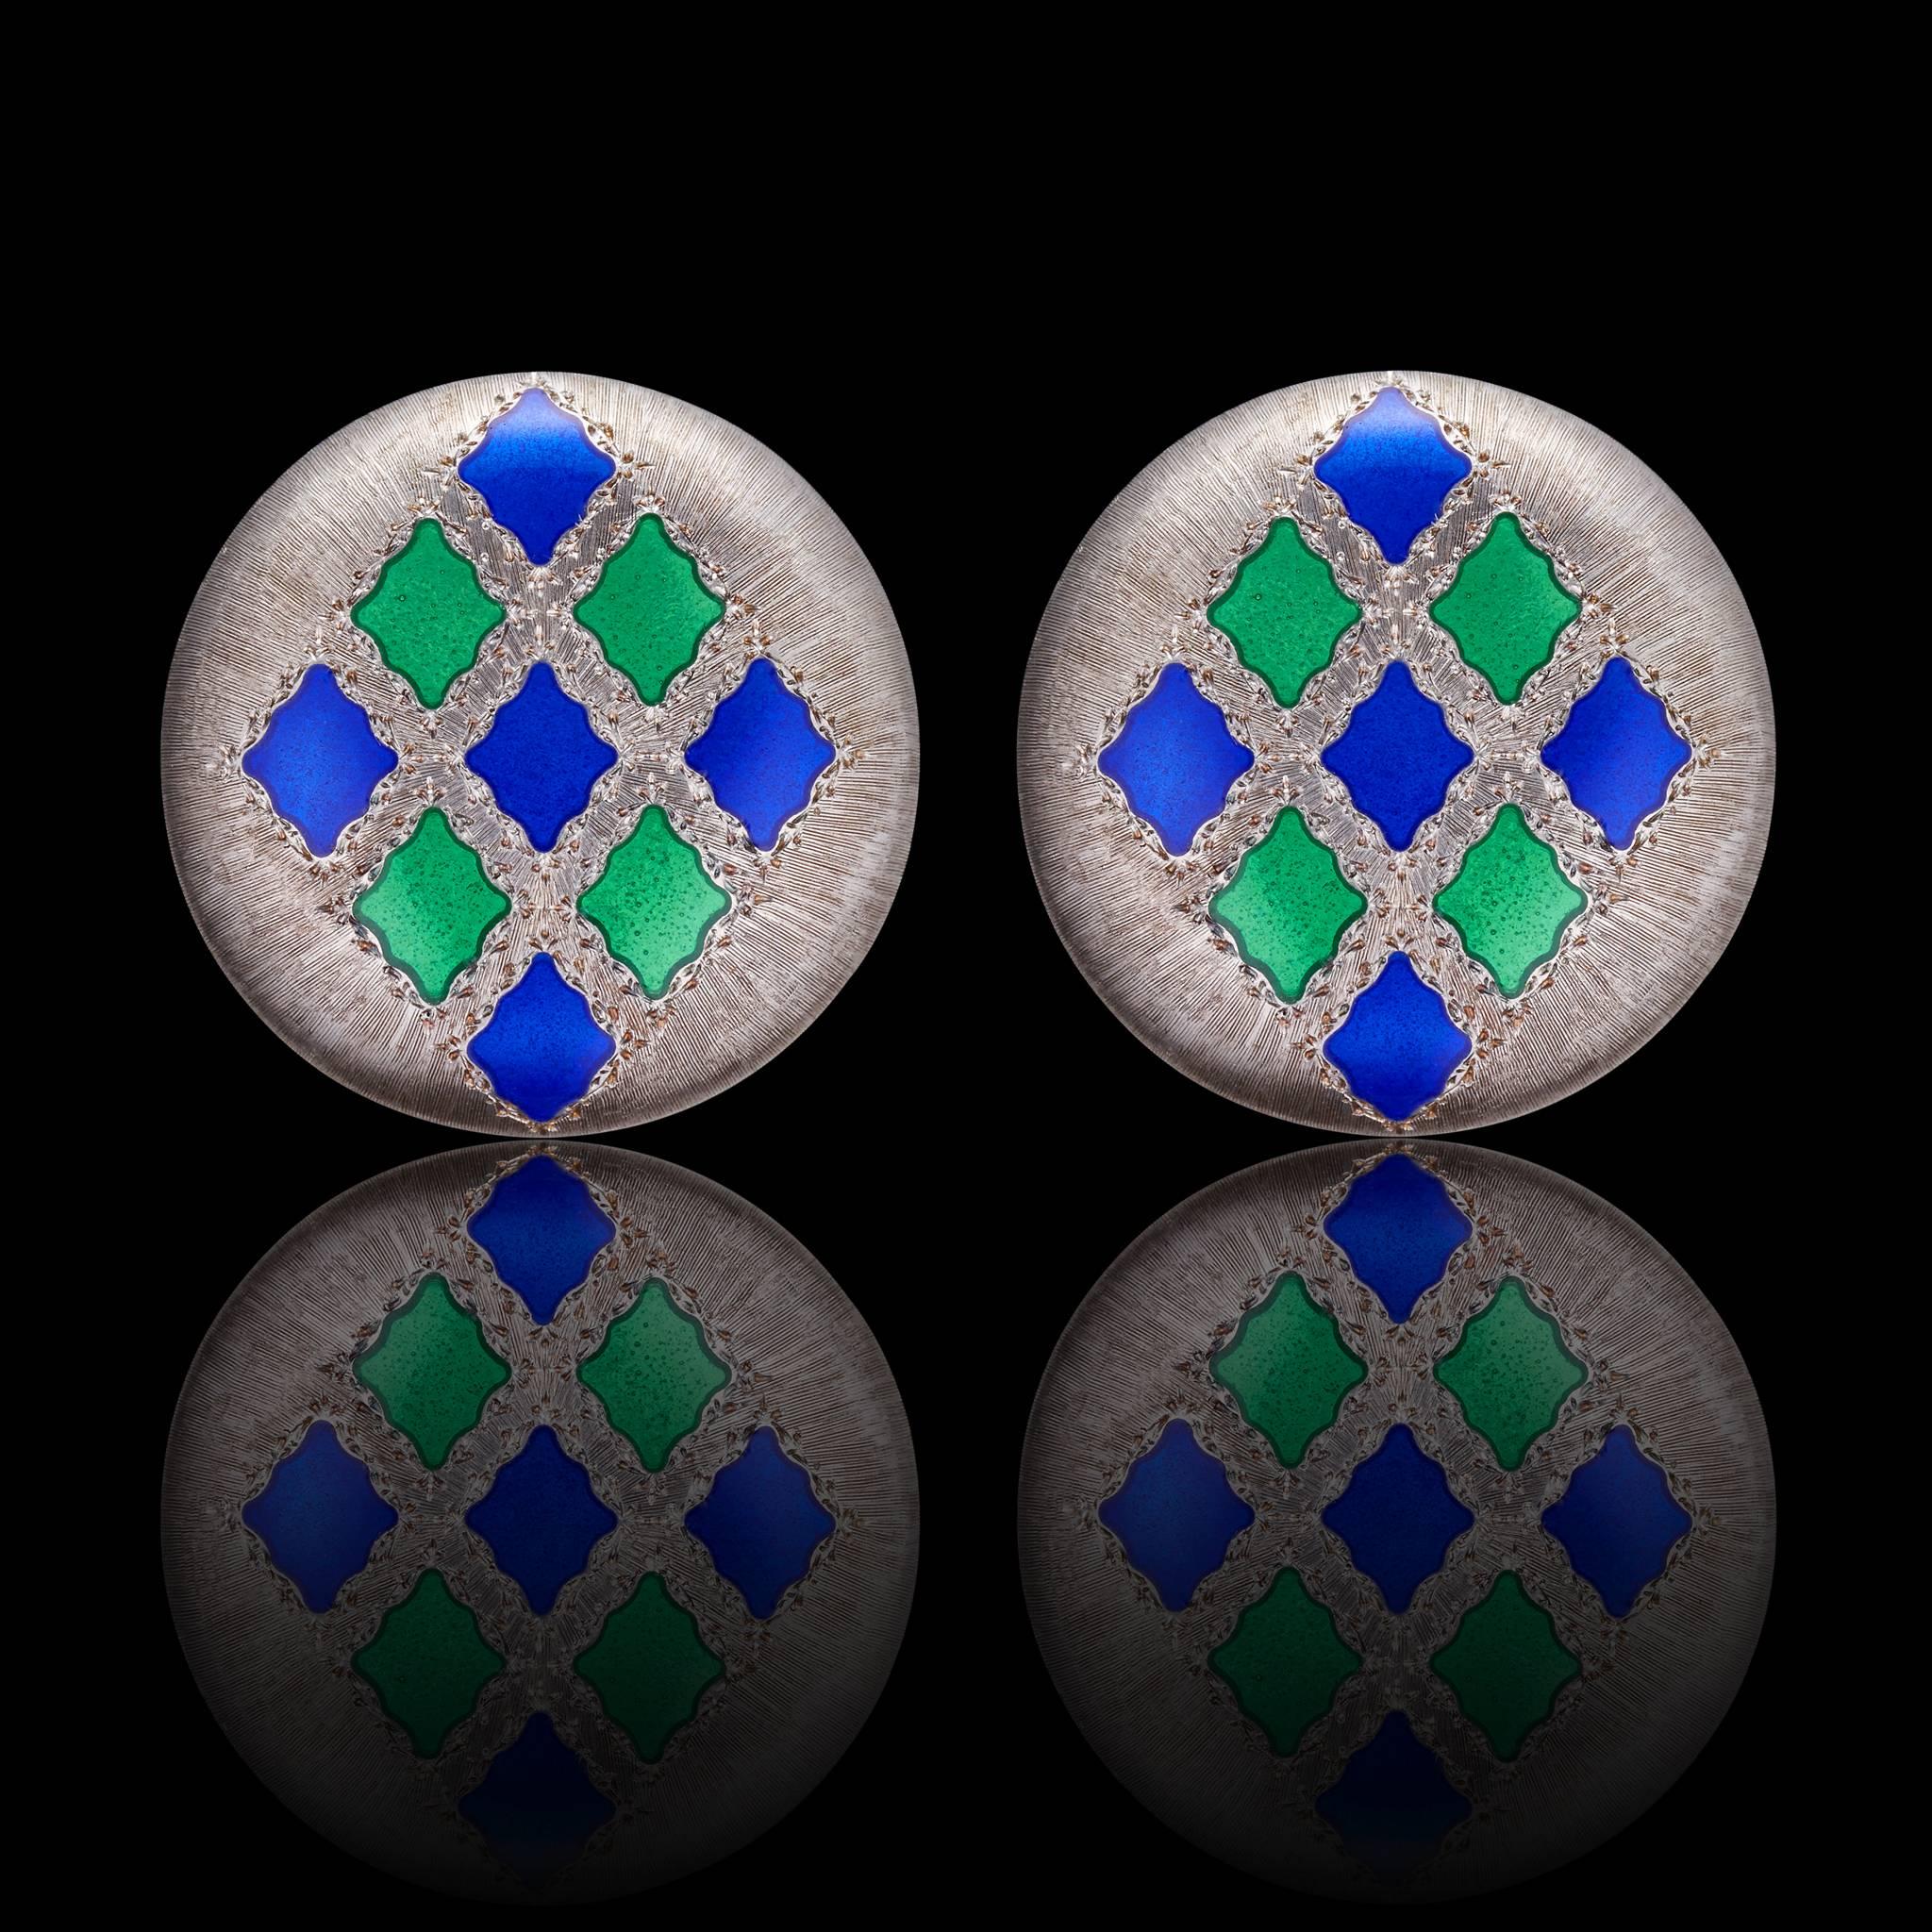 Gianmaria Buccellati earrings in 18 carats yellow Gold , textured silver with blue and green lozenge-shaped enamel.
-Ear clips fiting.
-Dimensions:2,2 cm diameter .
-Signature:Gianmaria Buccellati,Italy.
-Marks:18Kt,925